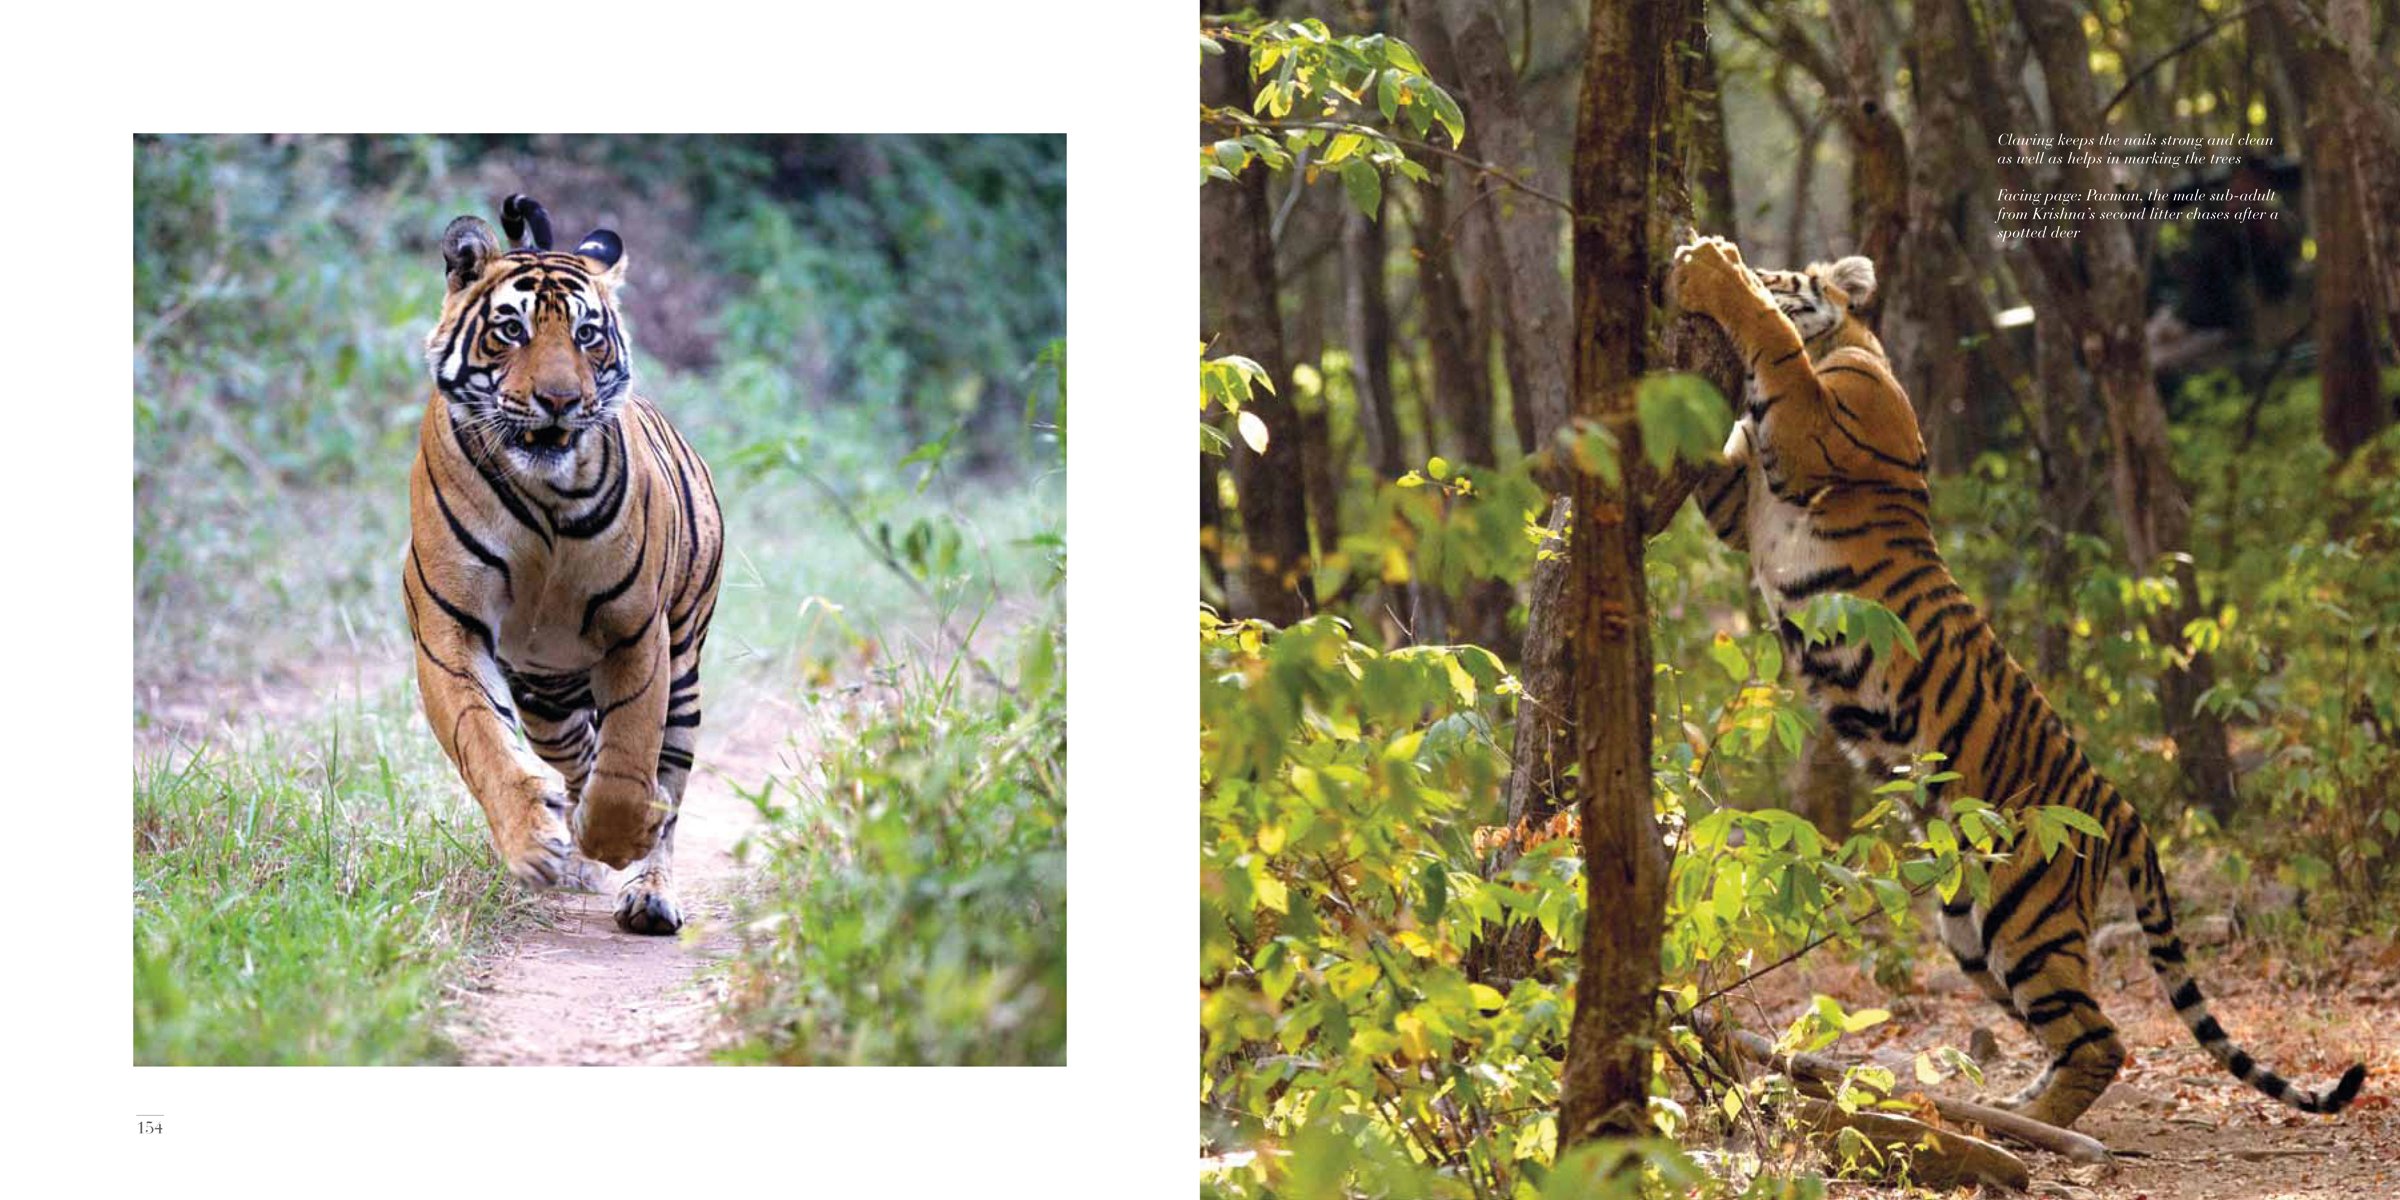 Tigress with cub standing on sanding track, red border, Silent Sentinels of Ranthambhore in red font below